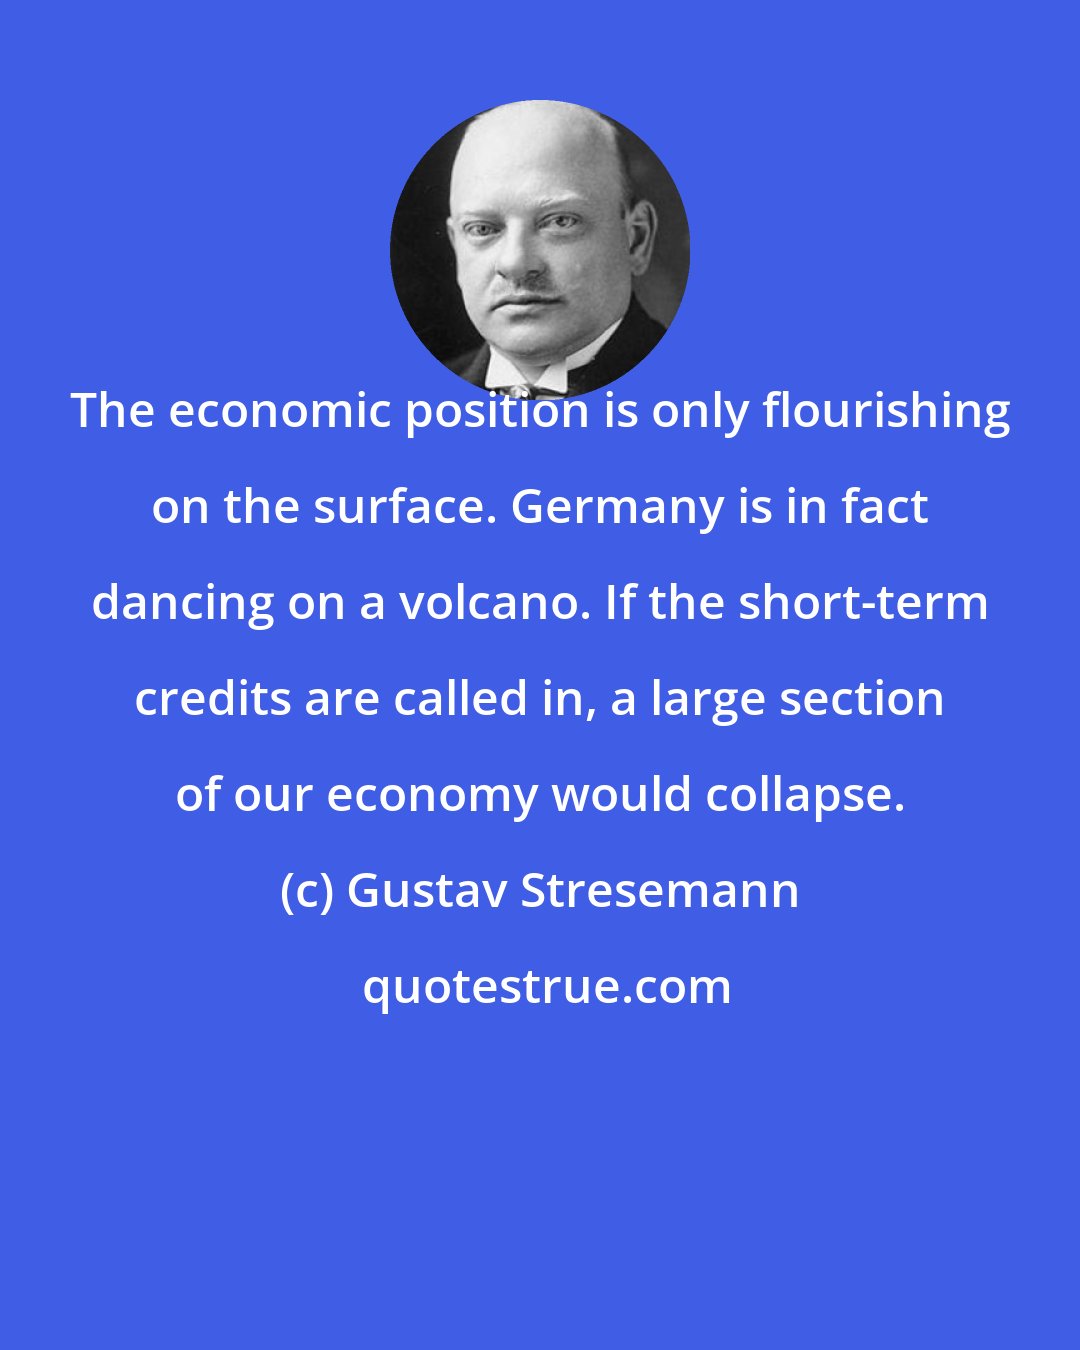 Gustav Stresemann: The economic position is only flourishing on the surface. Germany is in fact dancing on a volcano. If the short-term credits are called in, a large section of our economy would collapse.